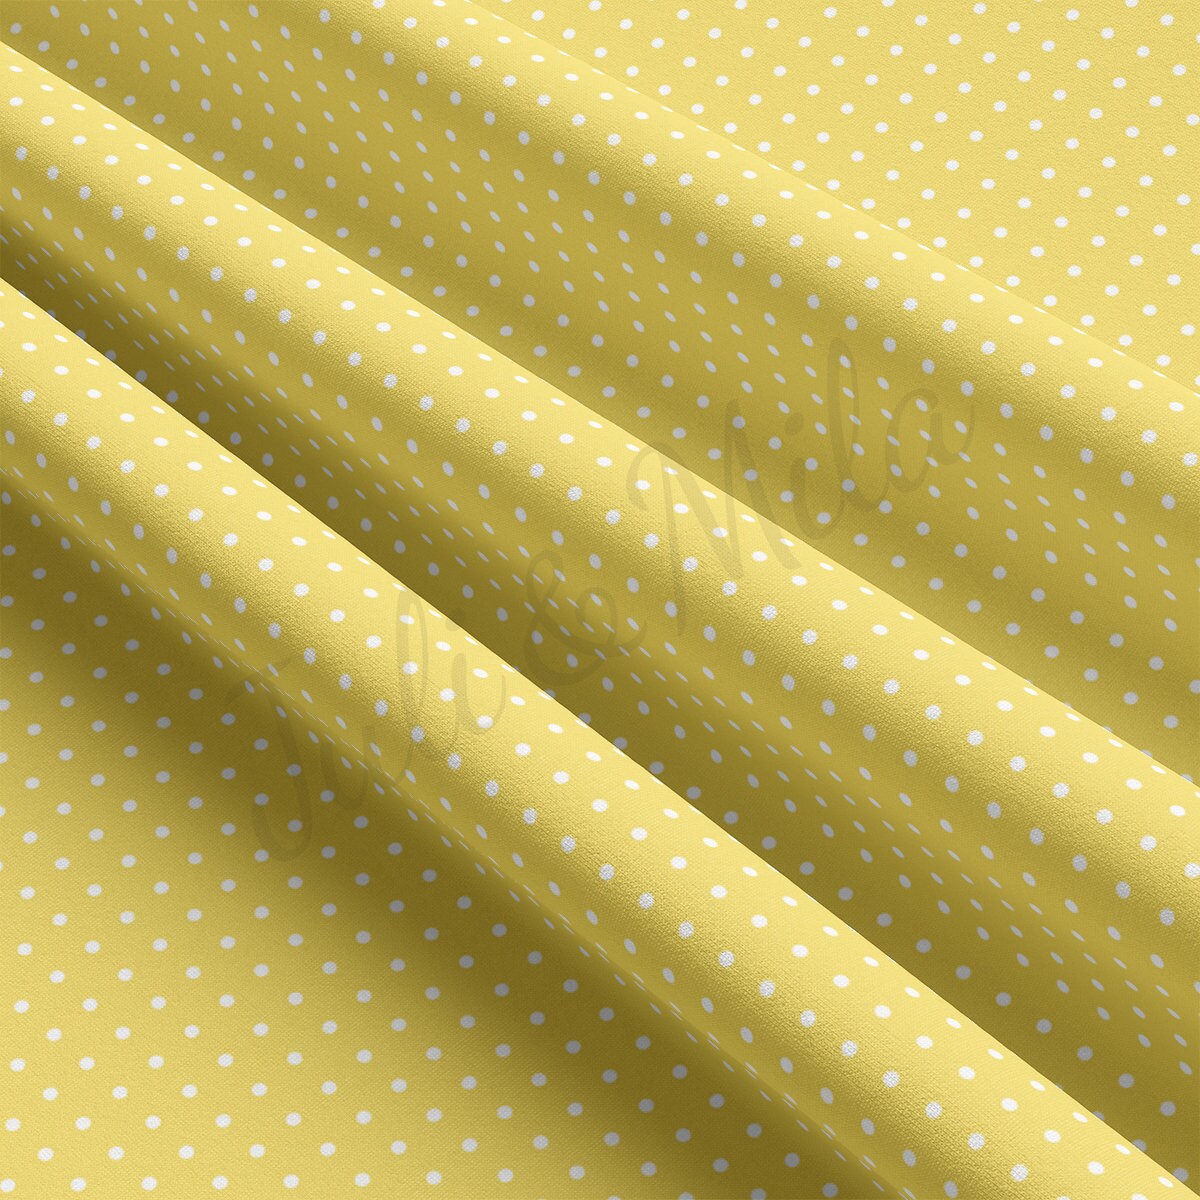 DBP Fabric Double Brushed Polyester DBP2390